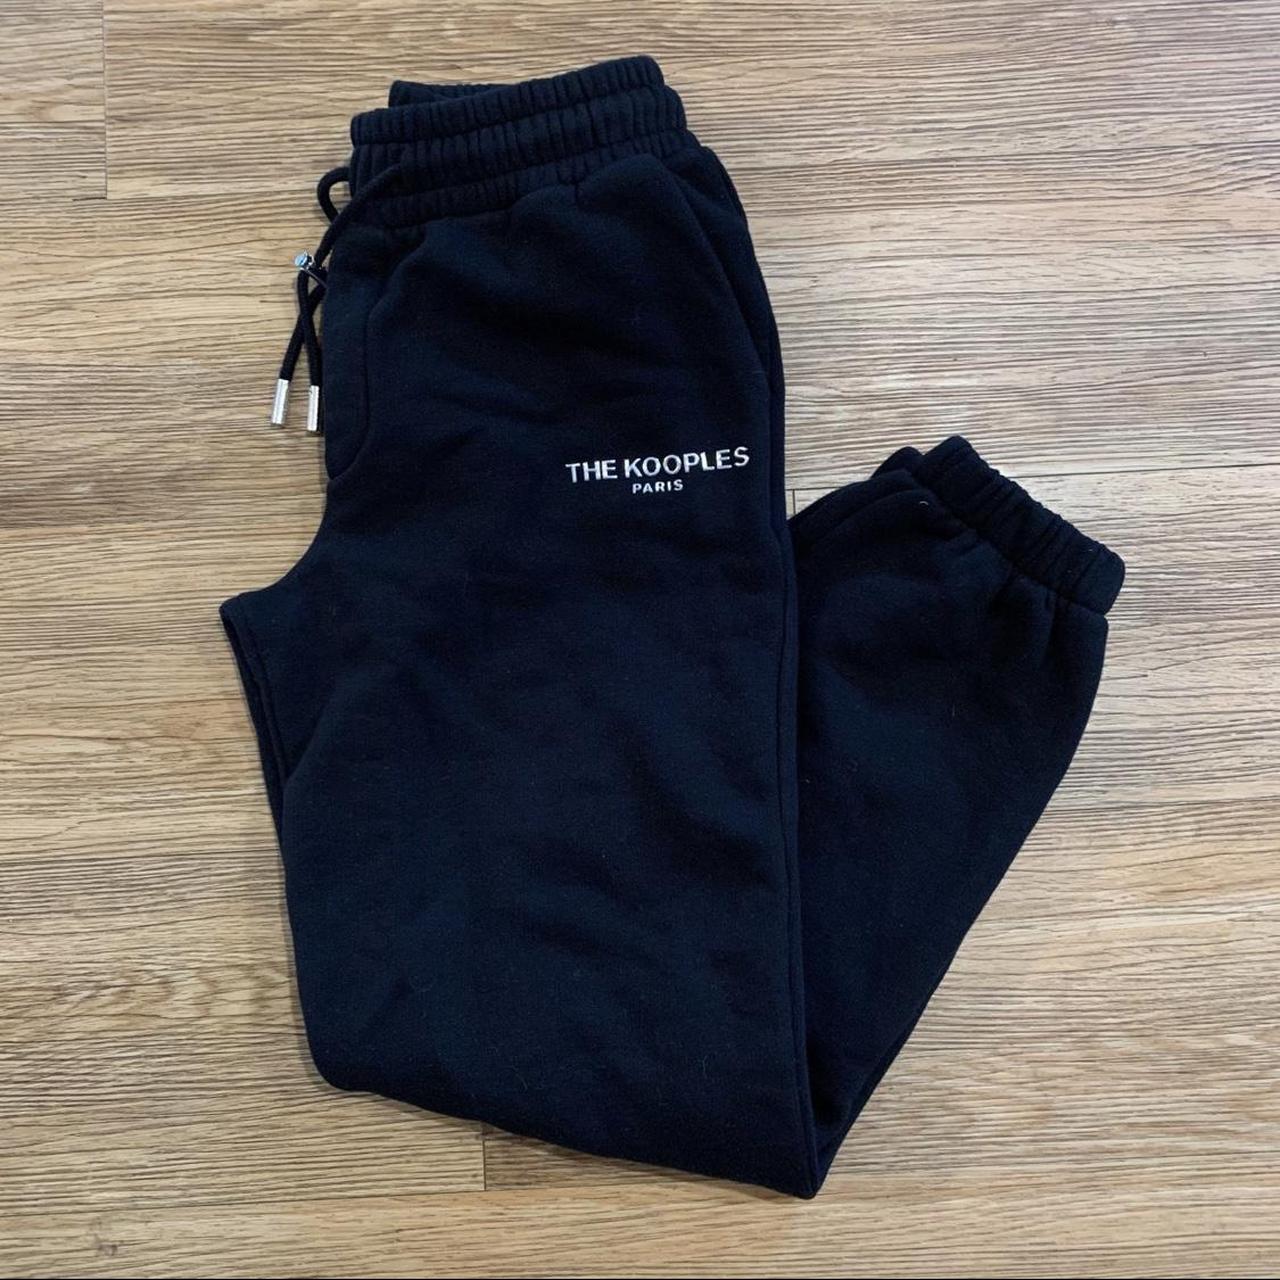 The Kooples Men's Black and Silver Joggers-tracksuits | Depop